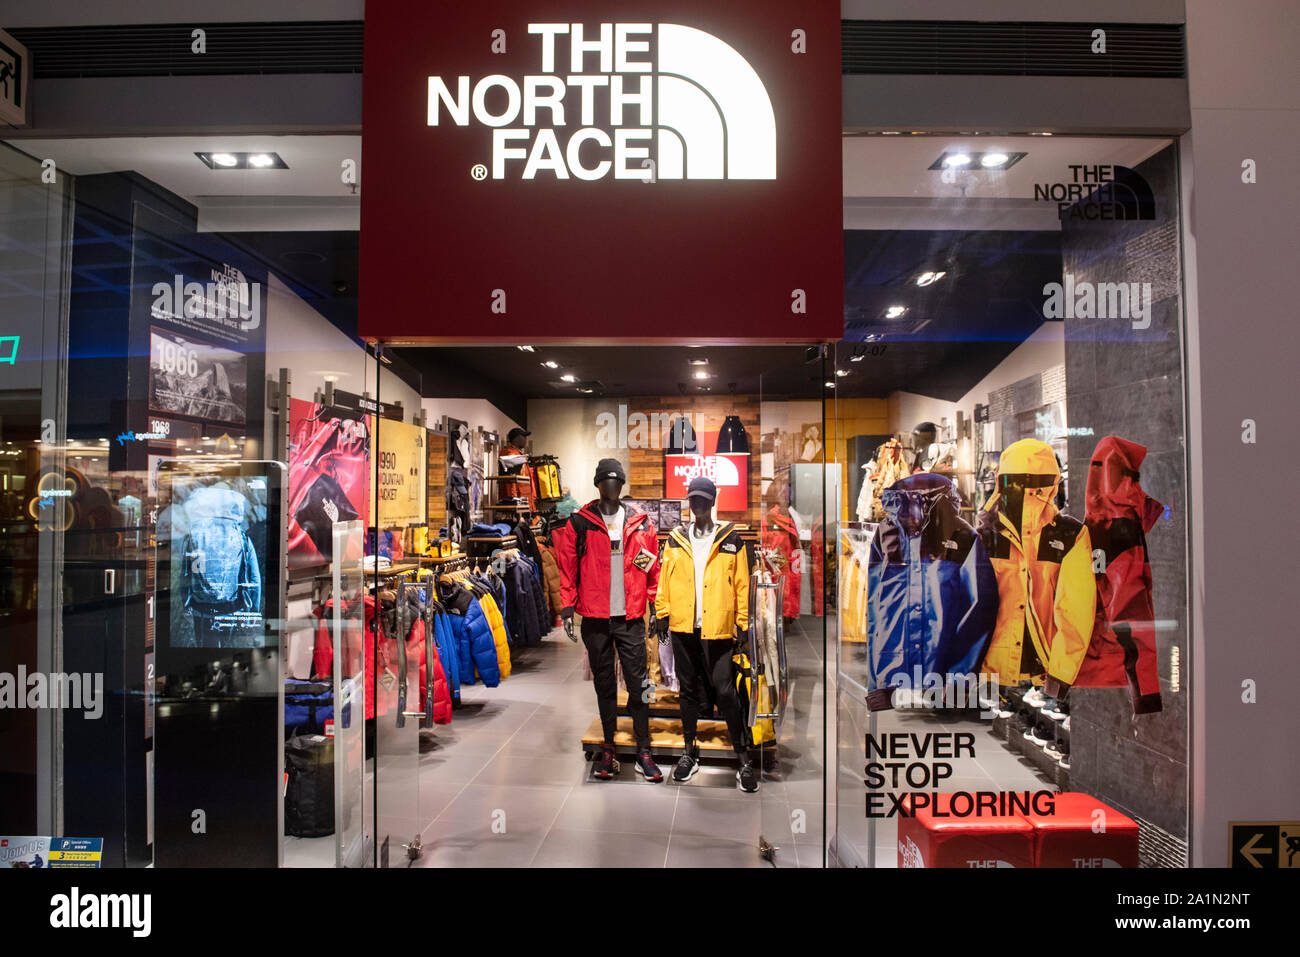 American outdoor clothing brand The North store in Hong Kong Photo - Alamy